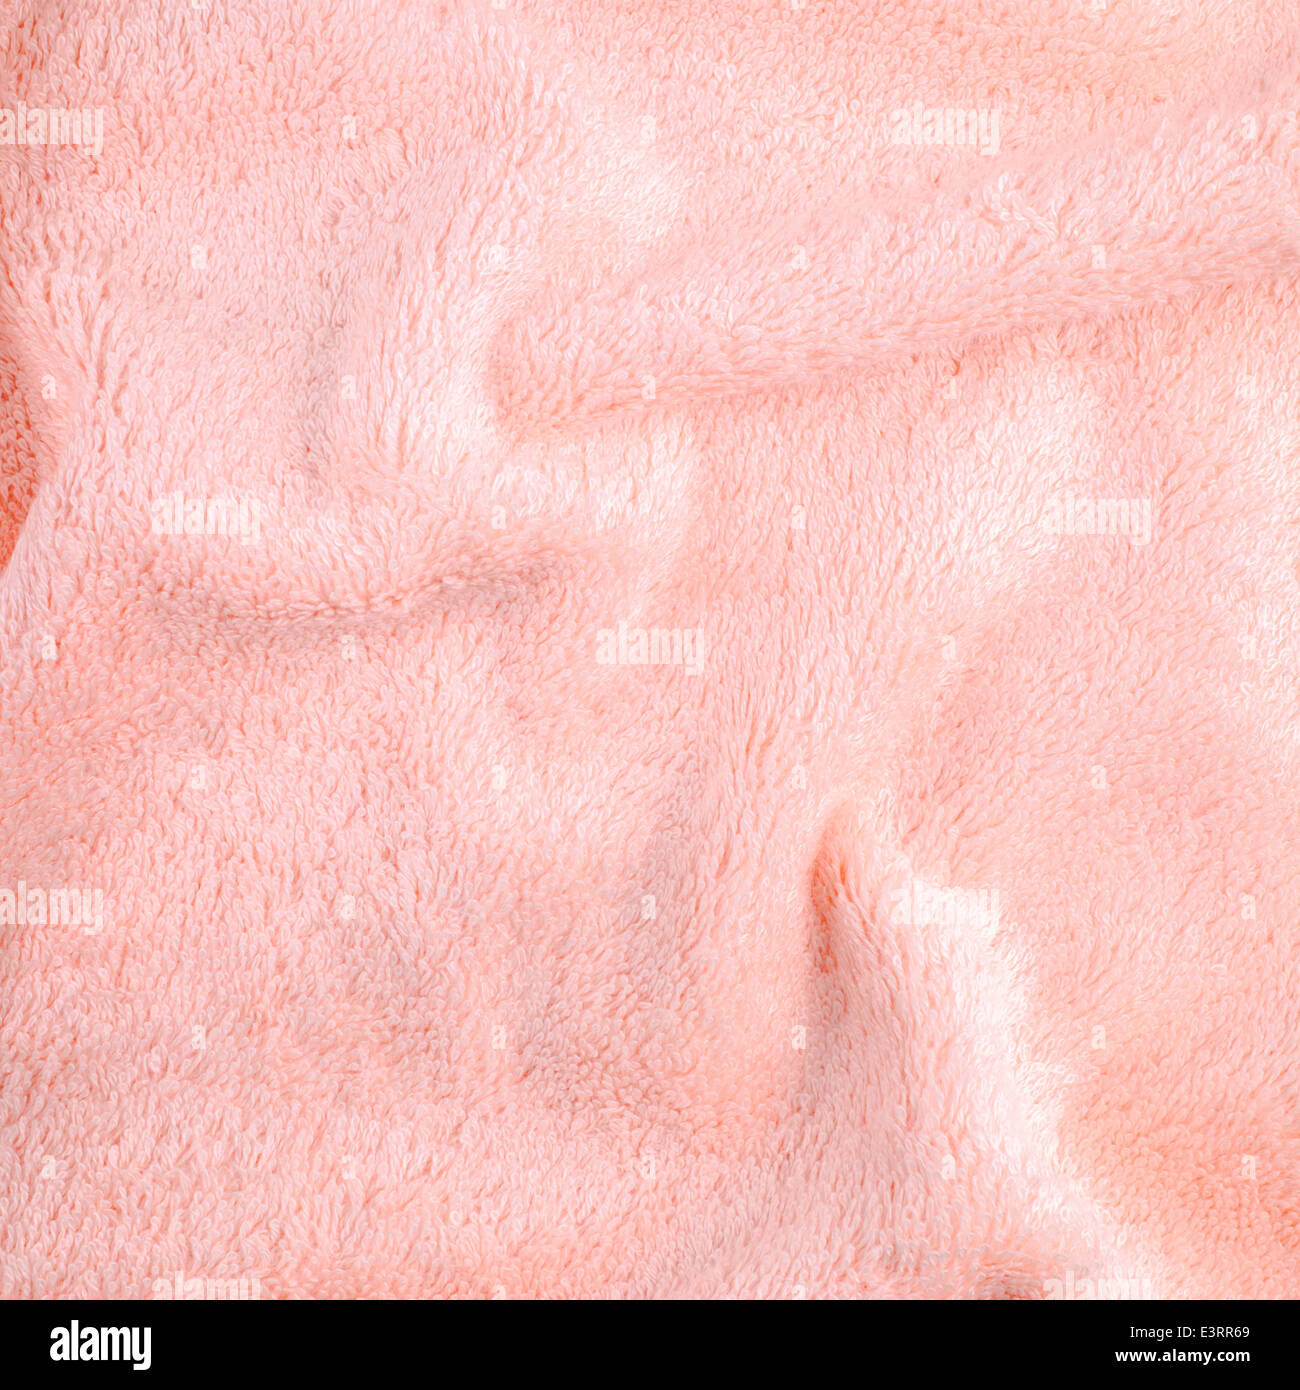 pink texture of bath towel folded as a background Stock Photo